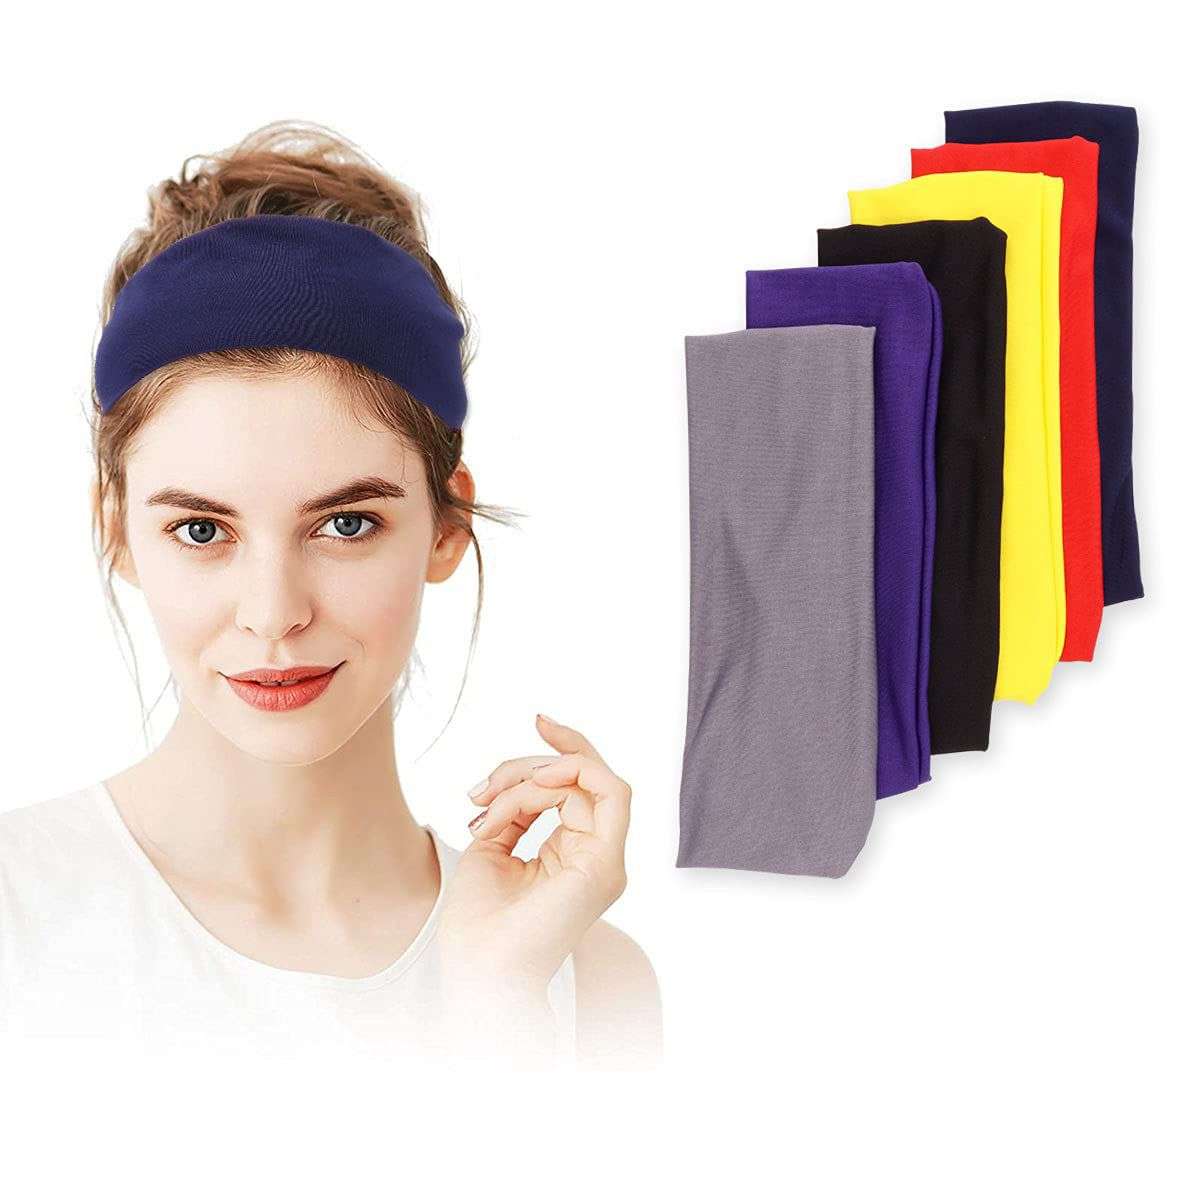 Buy Soft Adjustable Spa Facial Band Online at Best Price in Pakistan